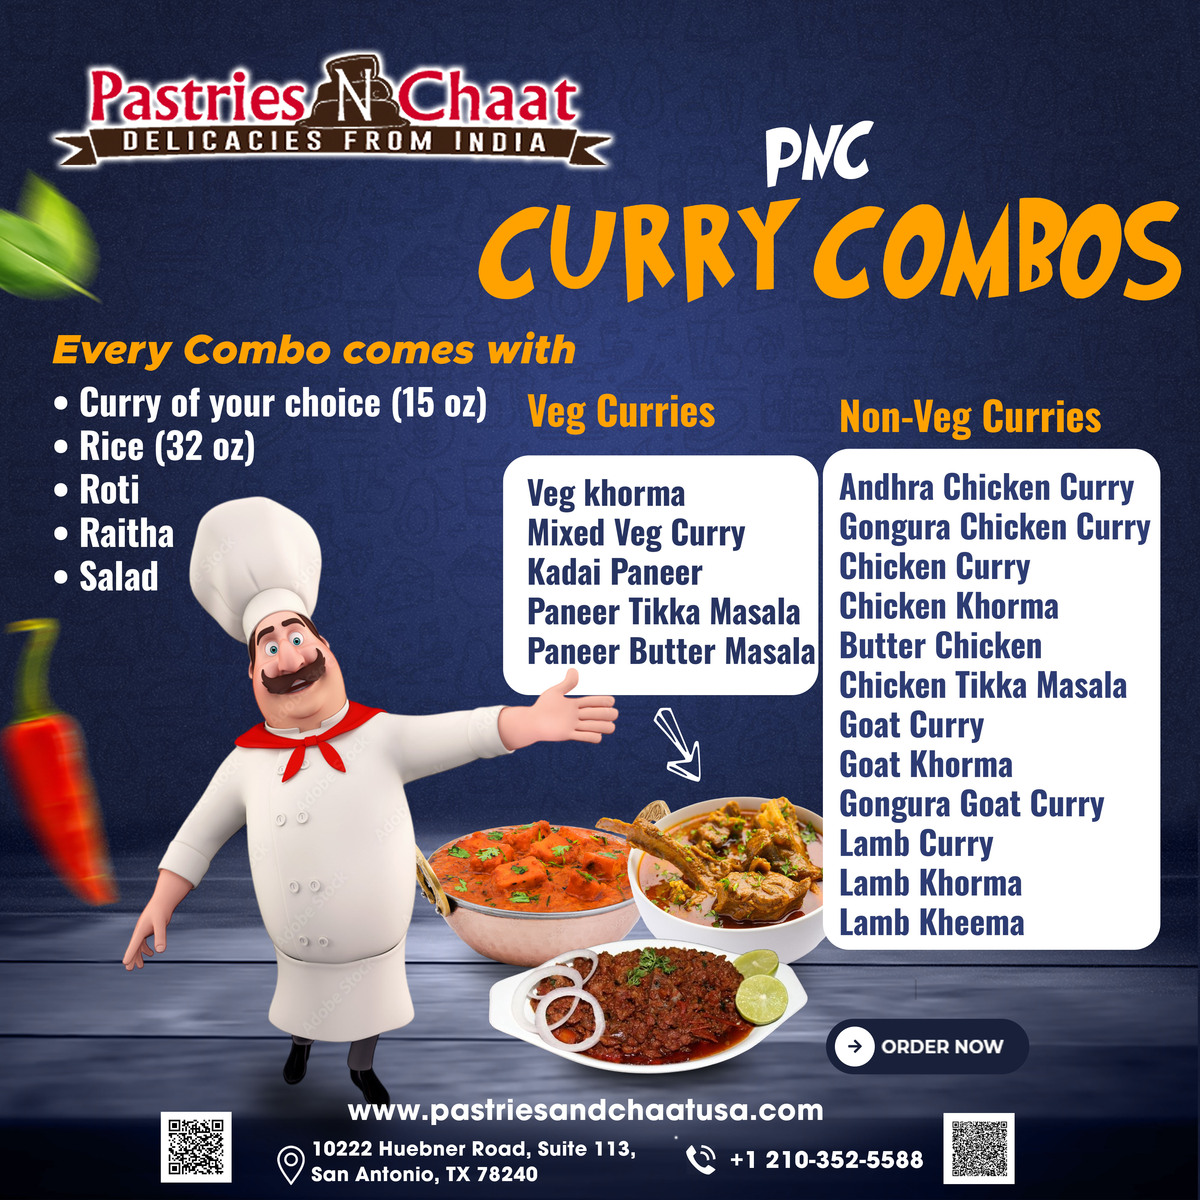 🍛🥖 Introducing PNC Curry Combos! 🥗🍚

Indulge in our delicious Curry Combos, crafted just for you!

Experience a burst of flavors with every bite!

📍 10222 Huebner Road, Suite 113, San Antonio, TX 78240

#CurryCombos #IndianCuisine #FoodCombo #CurryLovers